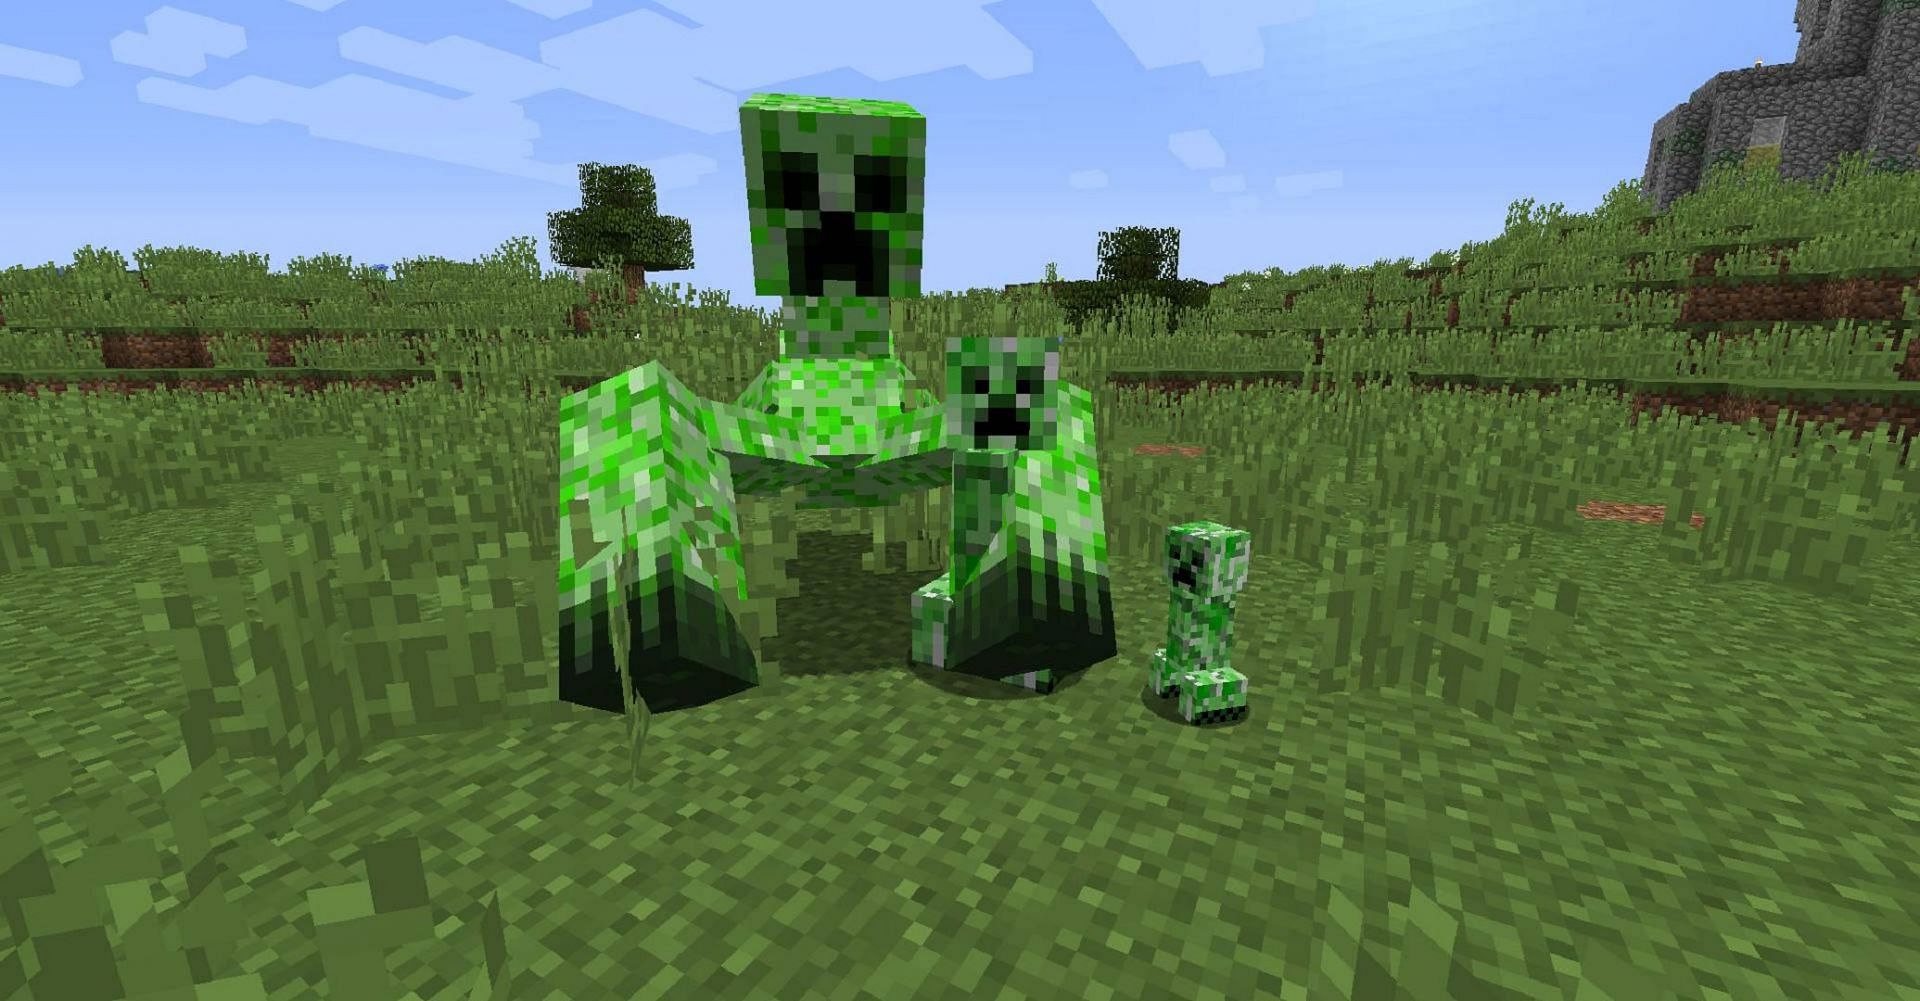 An example of a large mutant creeper (Image via Minecraft)